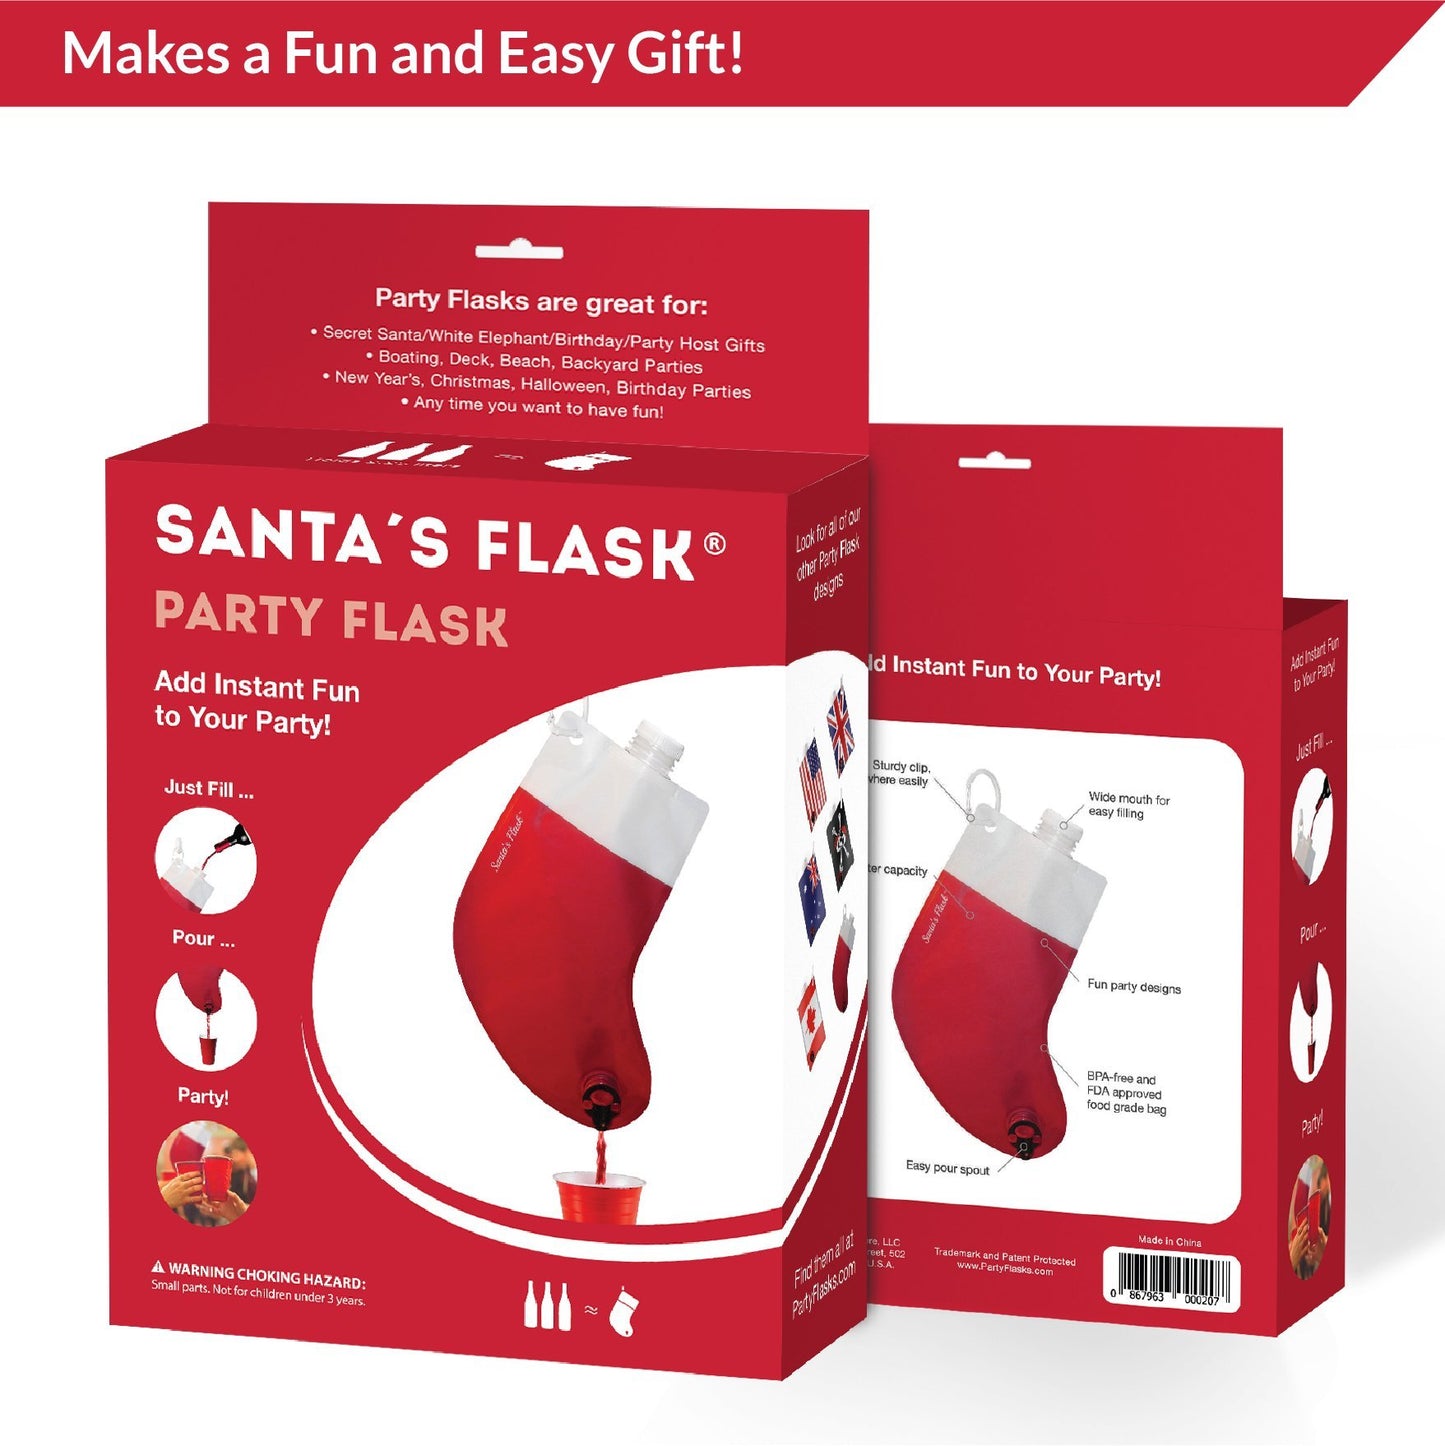 Santas Flask for Liquor, Wine, Drinks: Funny Gag Gifts for White Elephant Christmas Gifts Exchanges; Beverage Dispenser Holds 2.25 Liters for Holiday, Graduation, Office Parties